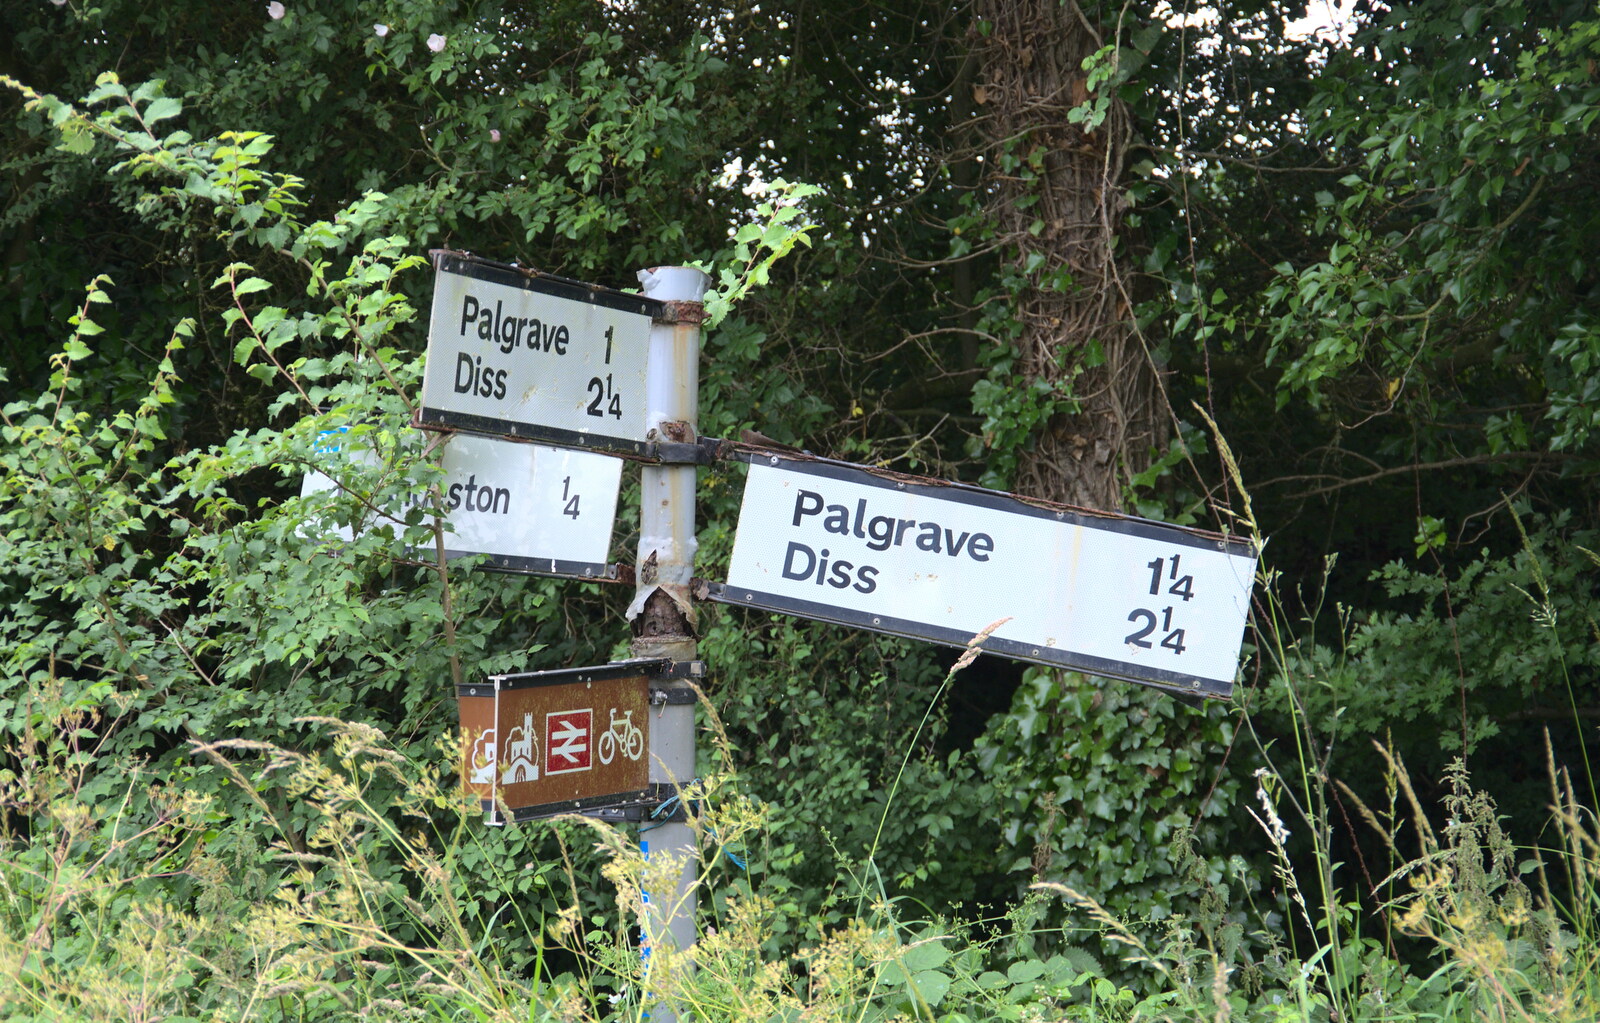 A classic Suffolk sign - designed to confuse visitors from The Formerly-Known-As-The-Eye-Show, Palgrave, Suffolk - 17th June 2018